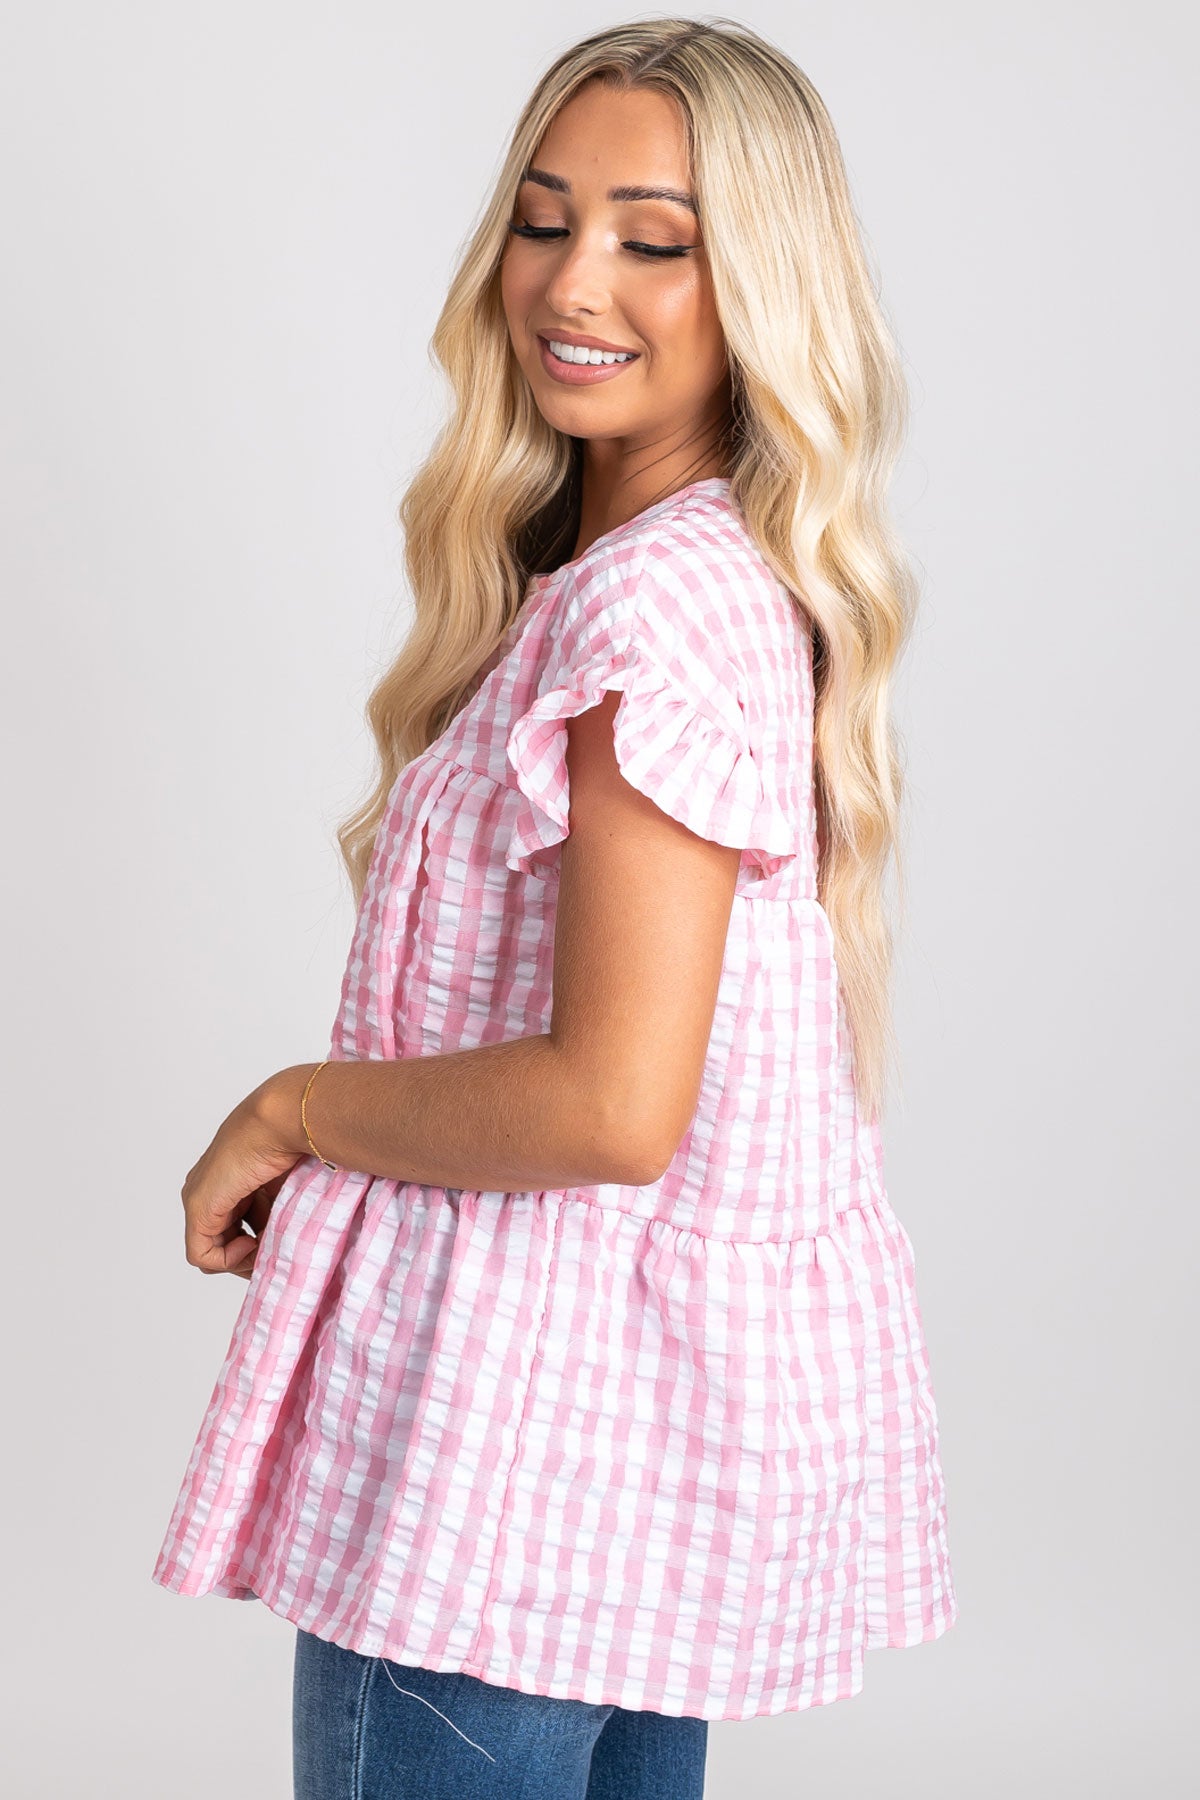 Women's gingham peplum top for spring and summer